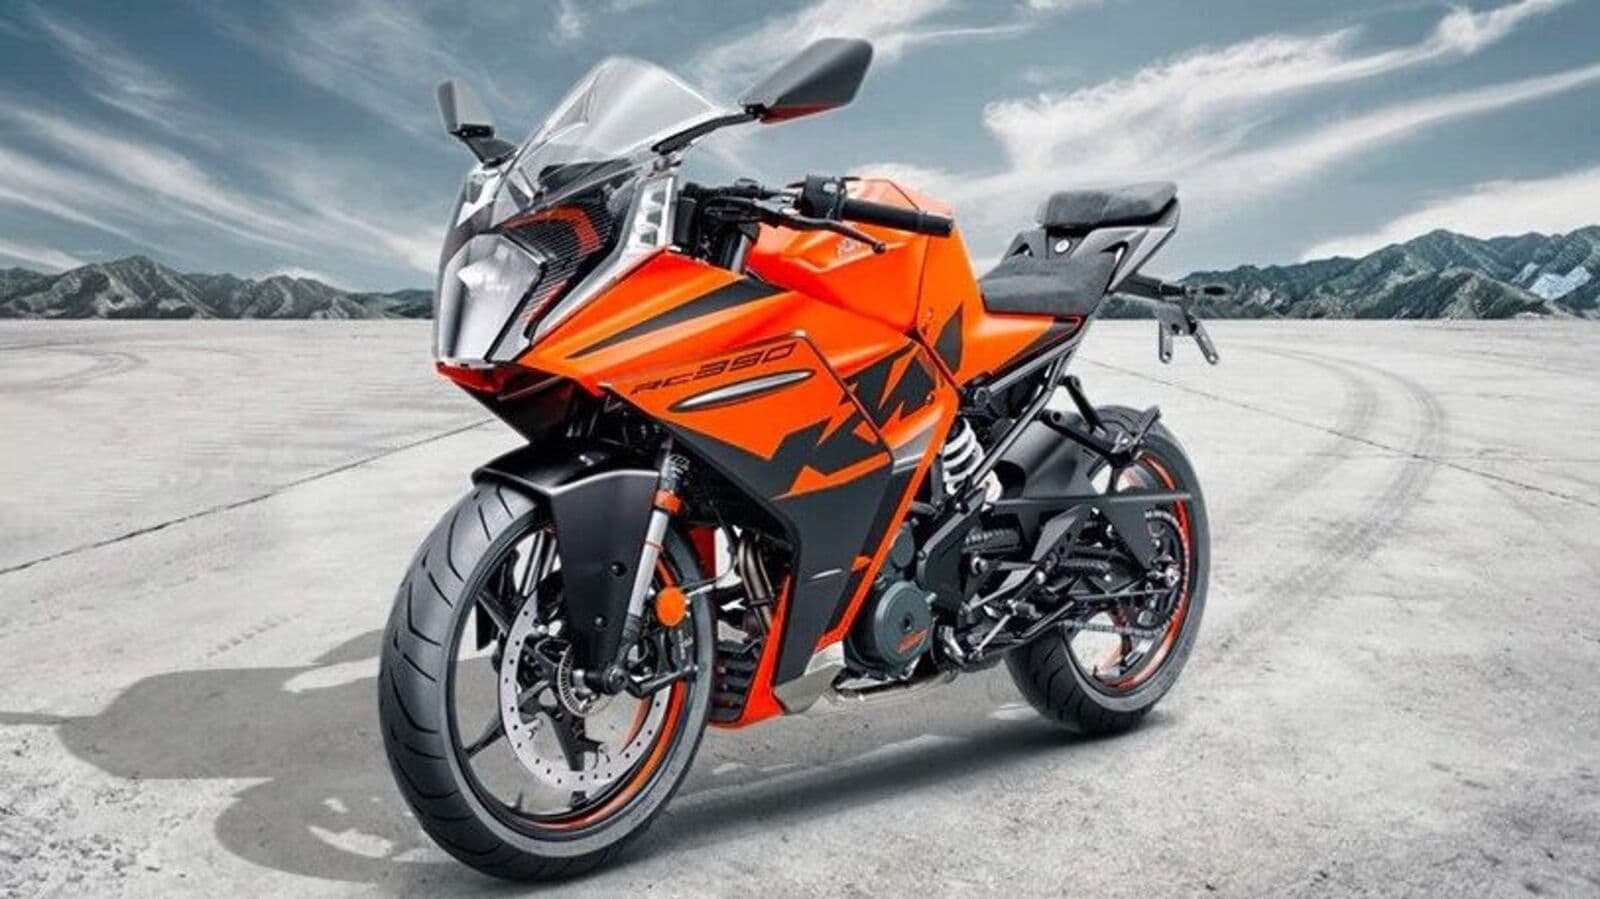 2022 Ktm Rc390 Listed On India Website, Launch Imminent | Ht Auto